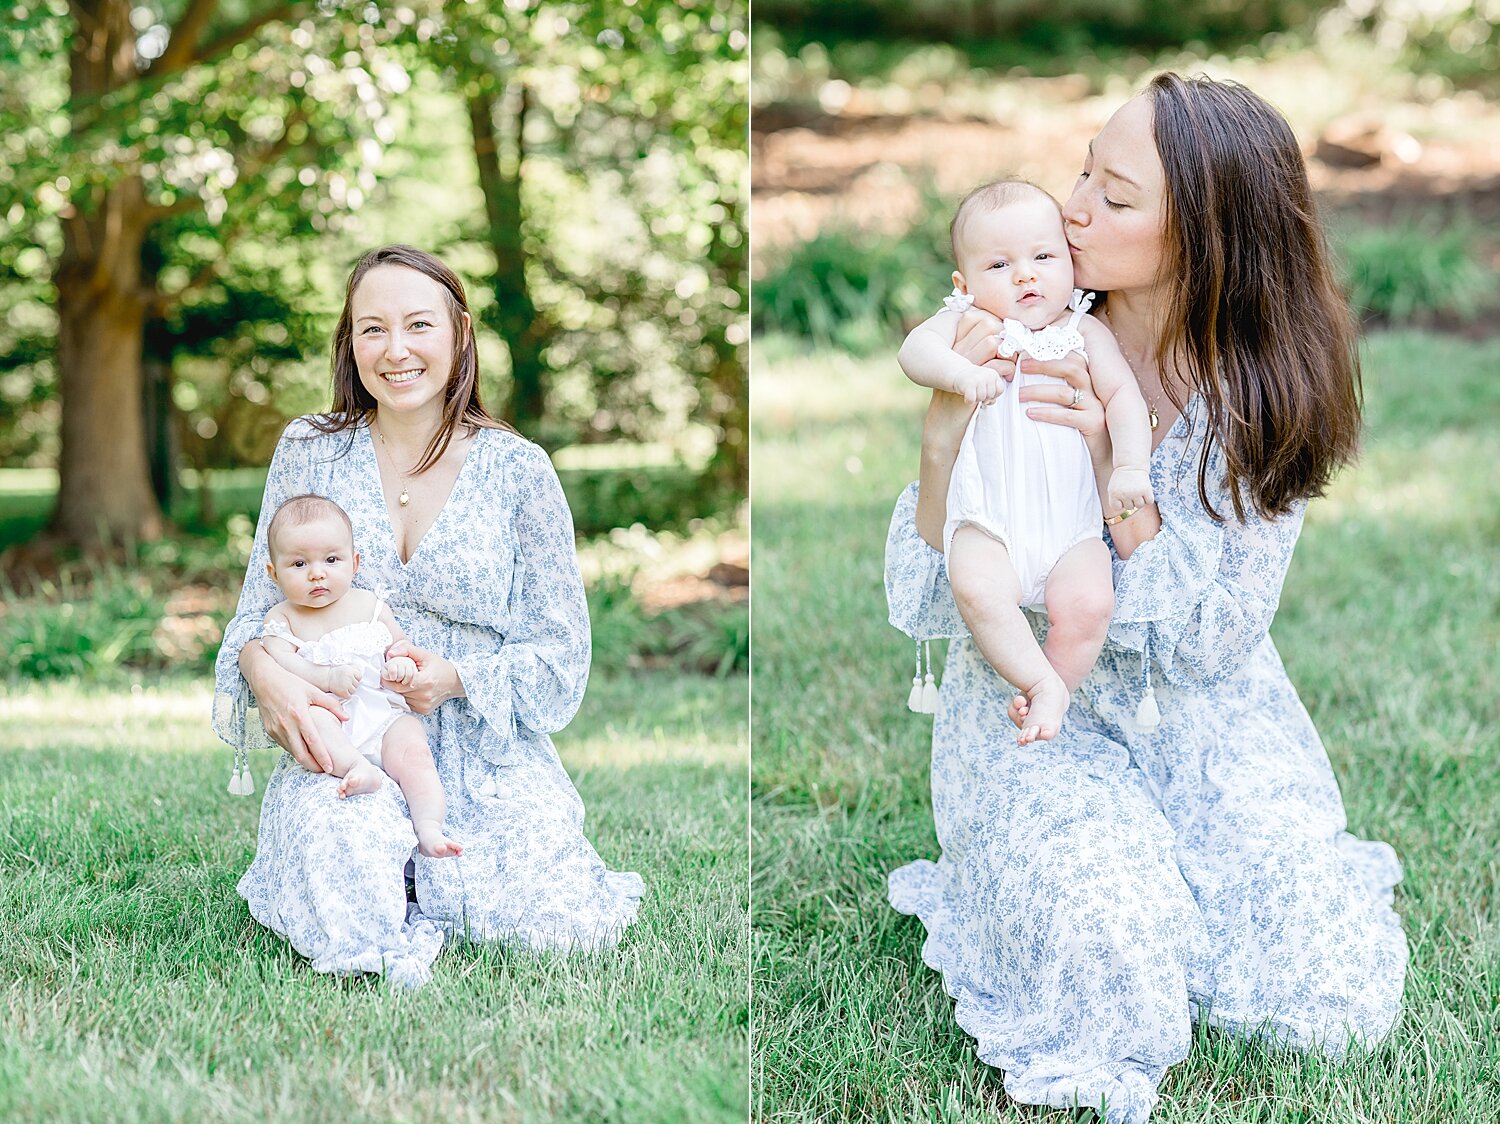 Mom with second baby girl during beautiful outdoor newborn photoshoot. Photos by Kristin Wood Photography.